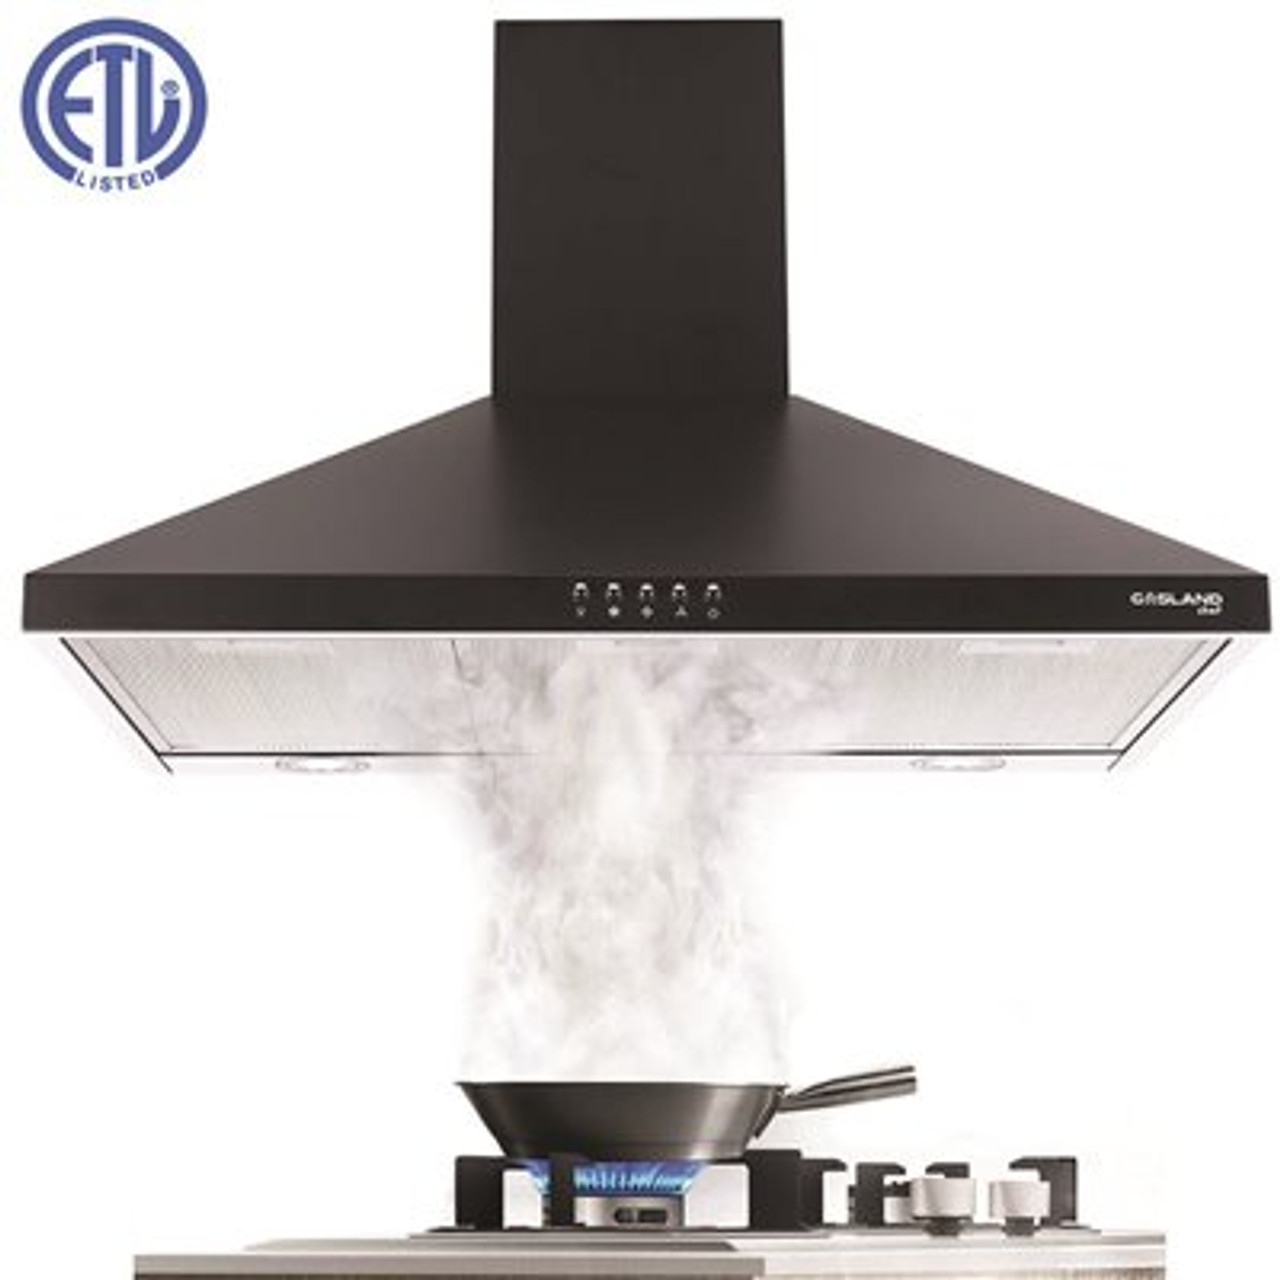 GASLAND Chef 30 in. Wall Mount Range Hood with Aluminum Filters LED Lights Push Button Control in in Black Stainless Steel